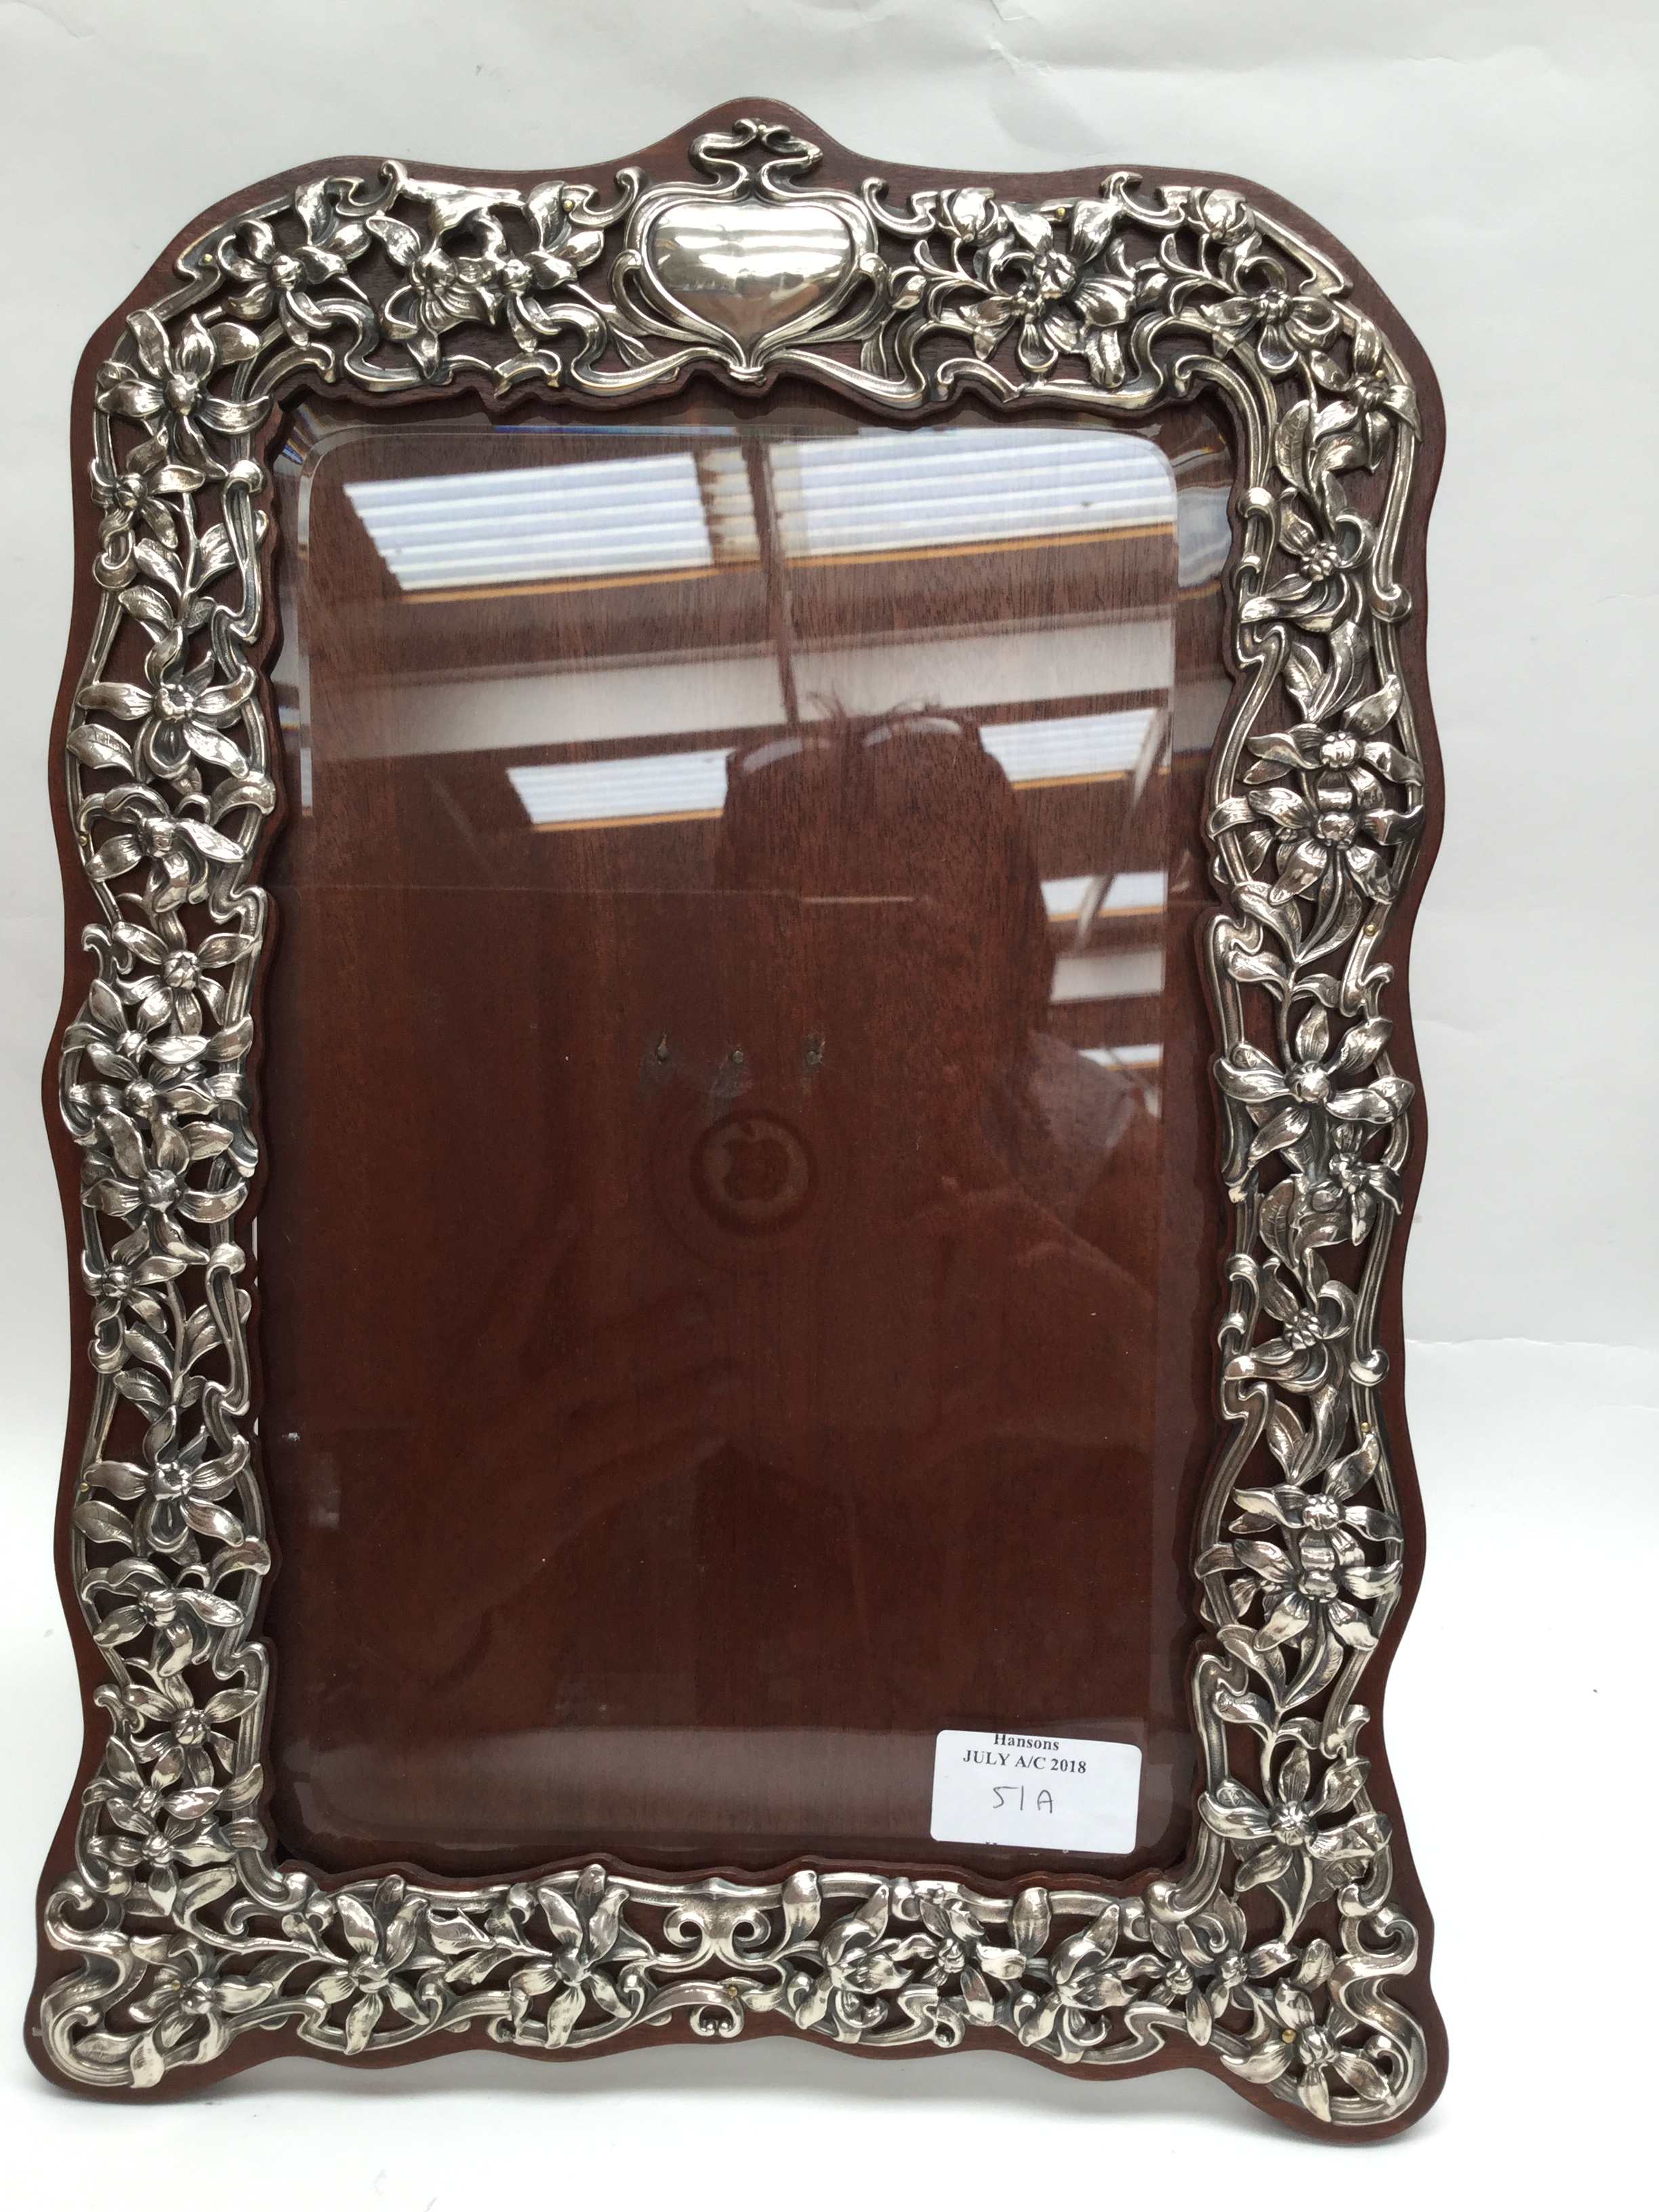 A large silver Art Nouveau frame made by William Comyns with hallmarks for London 1903 with